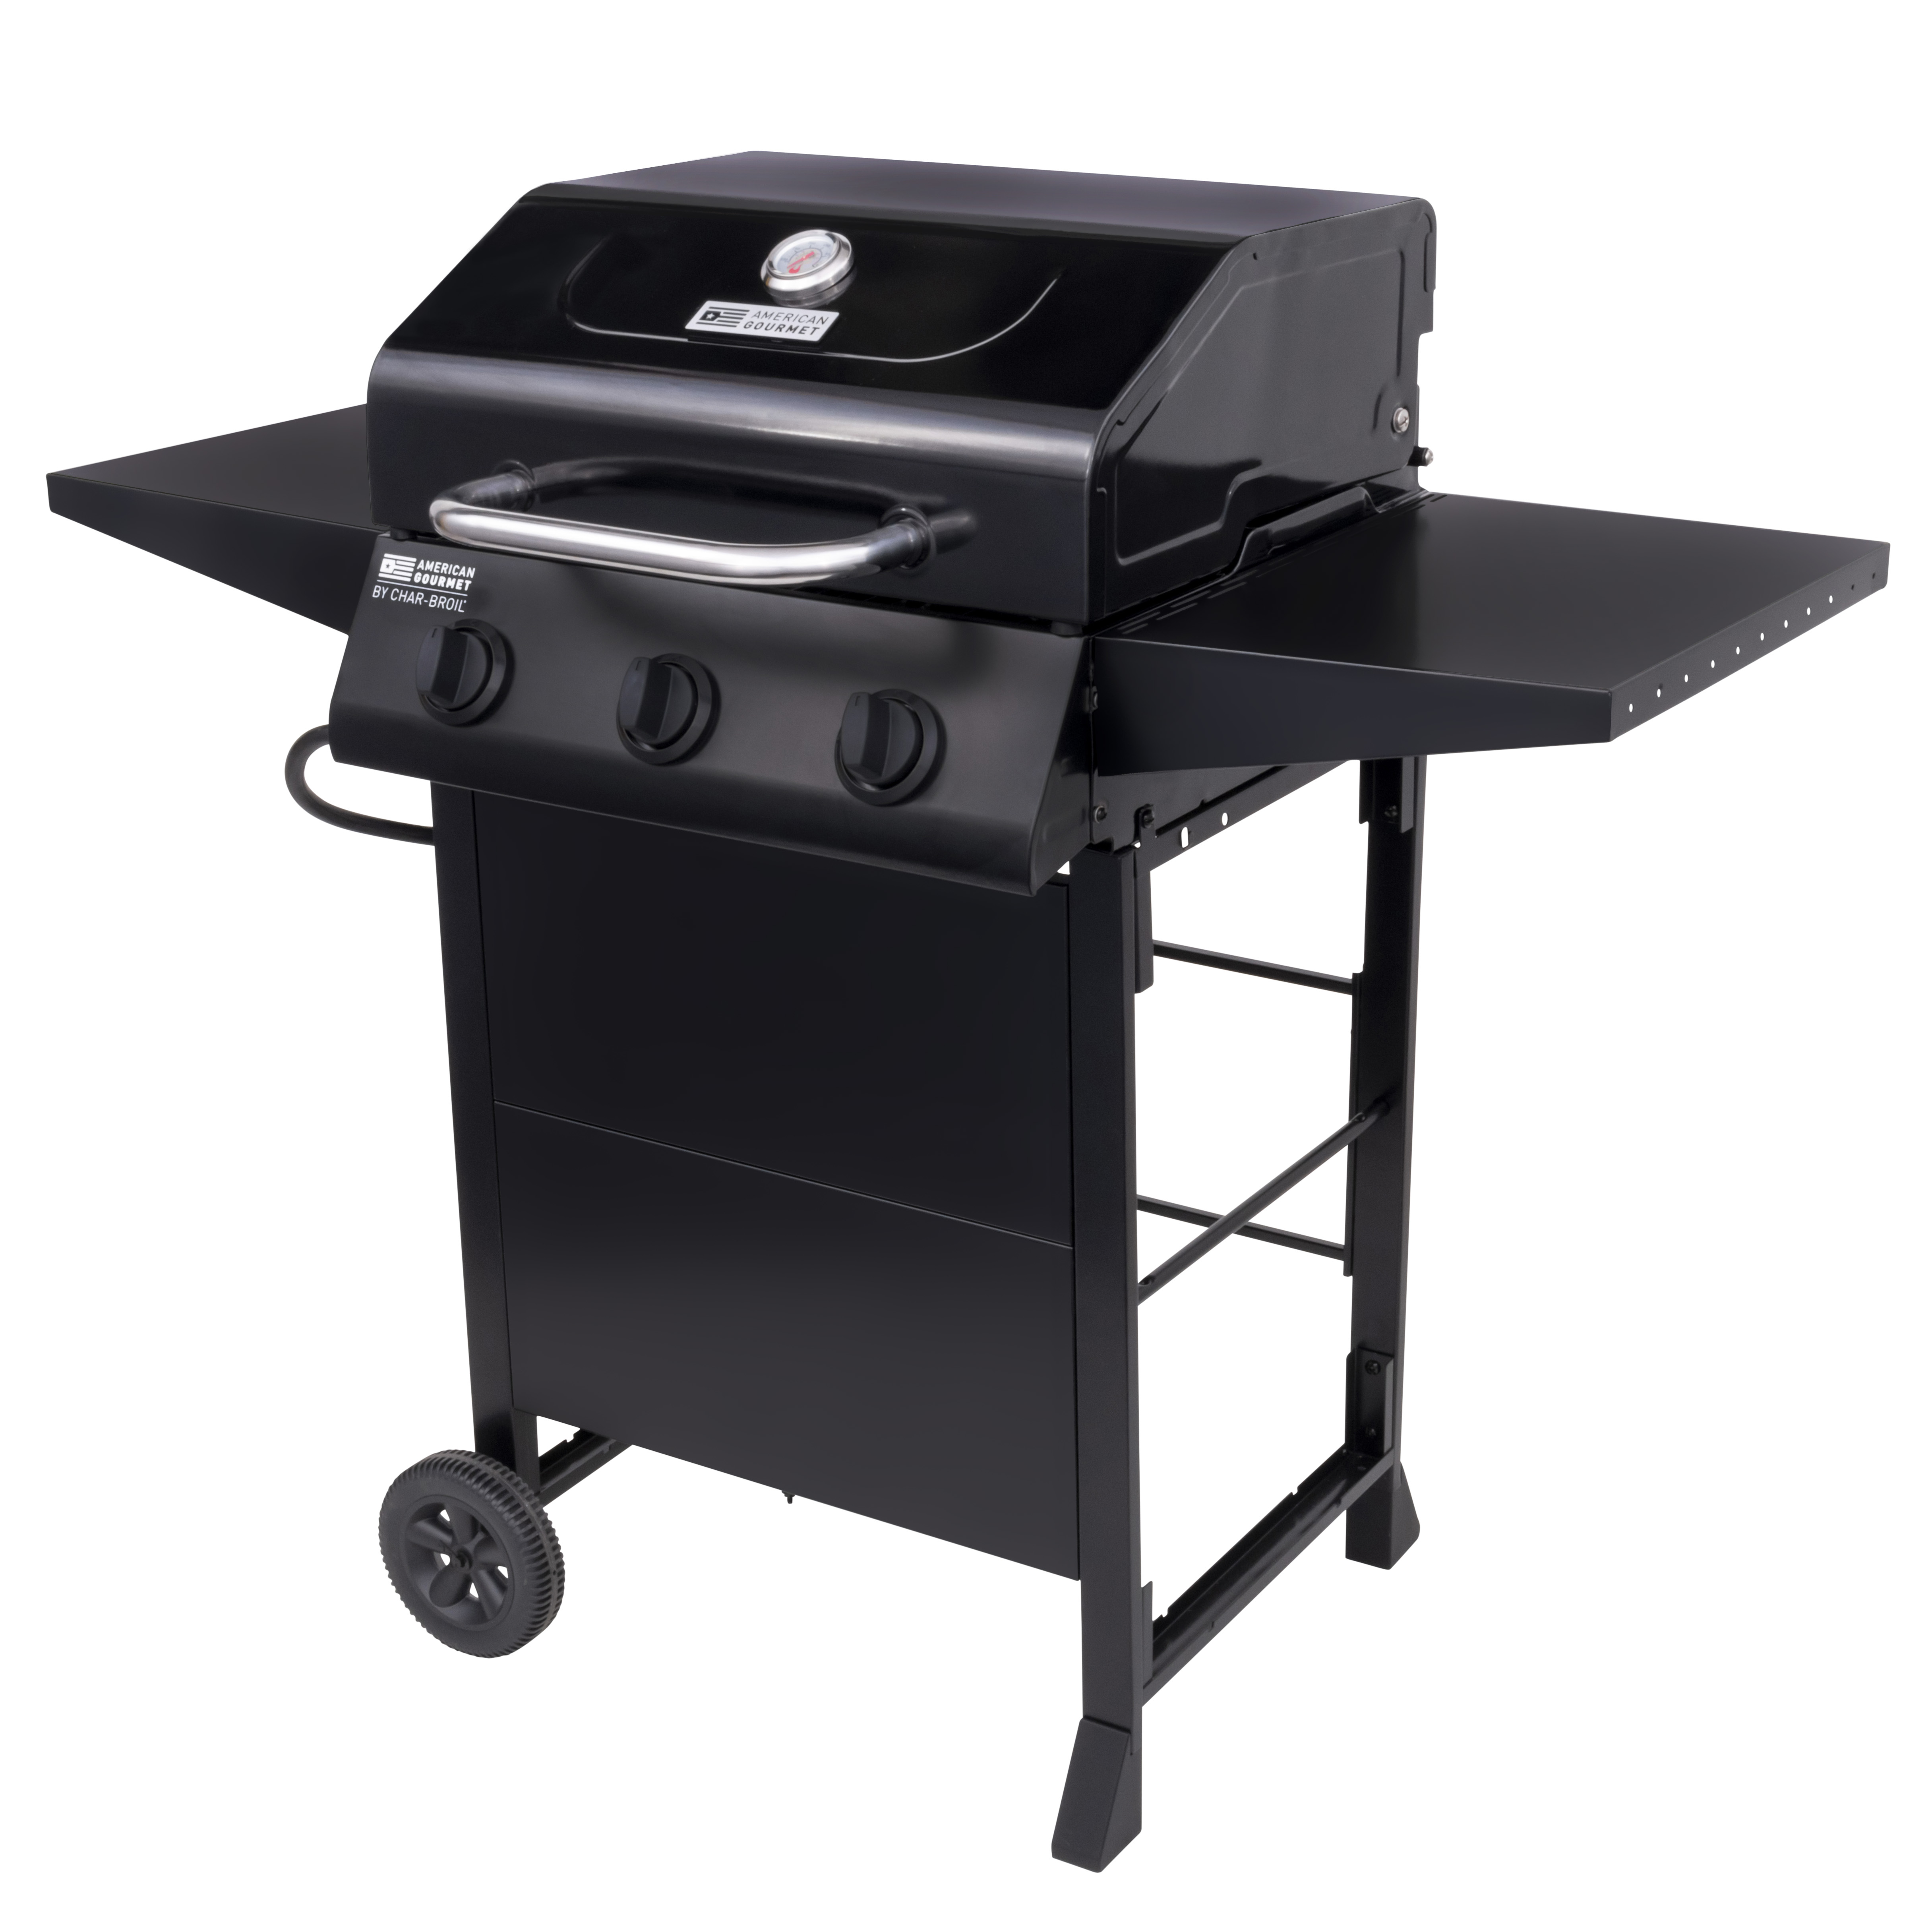 American Gourmet by Char-Broil 3-Burner Cart Liquid Propane (LP) Gas Grill - image 4 of 13